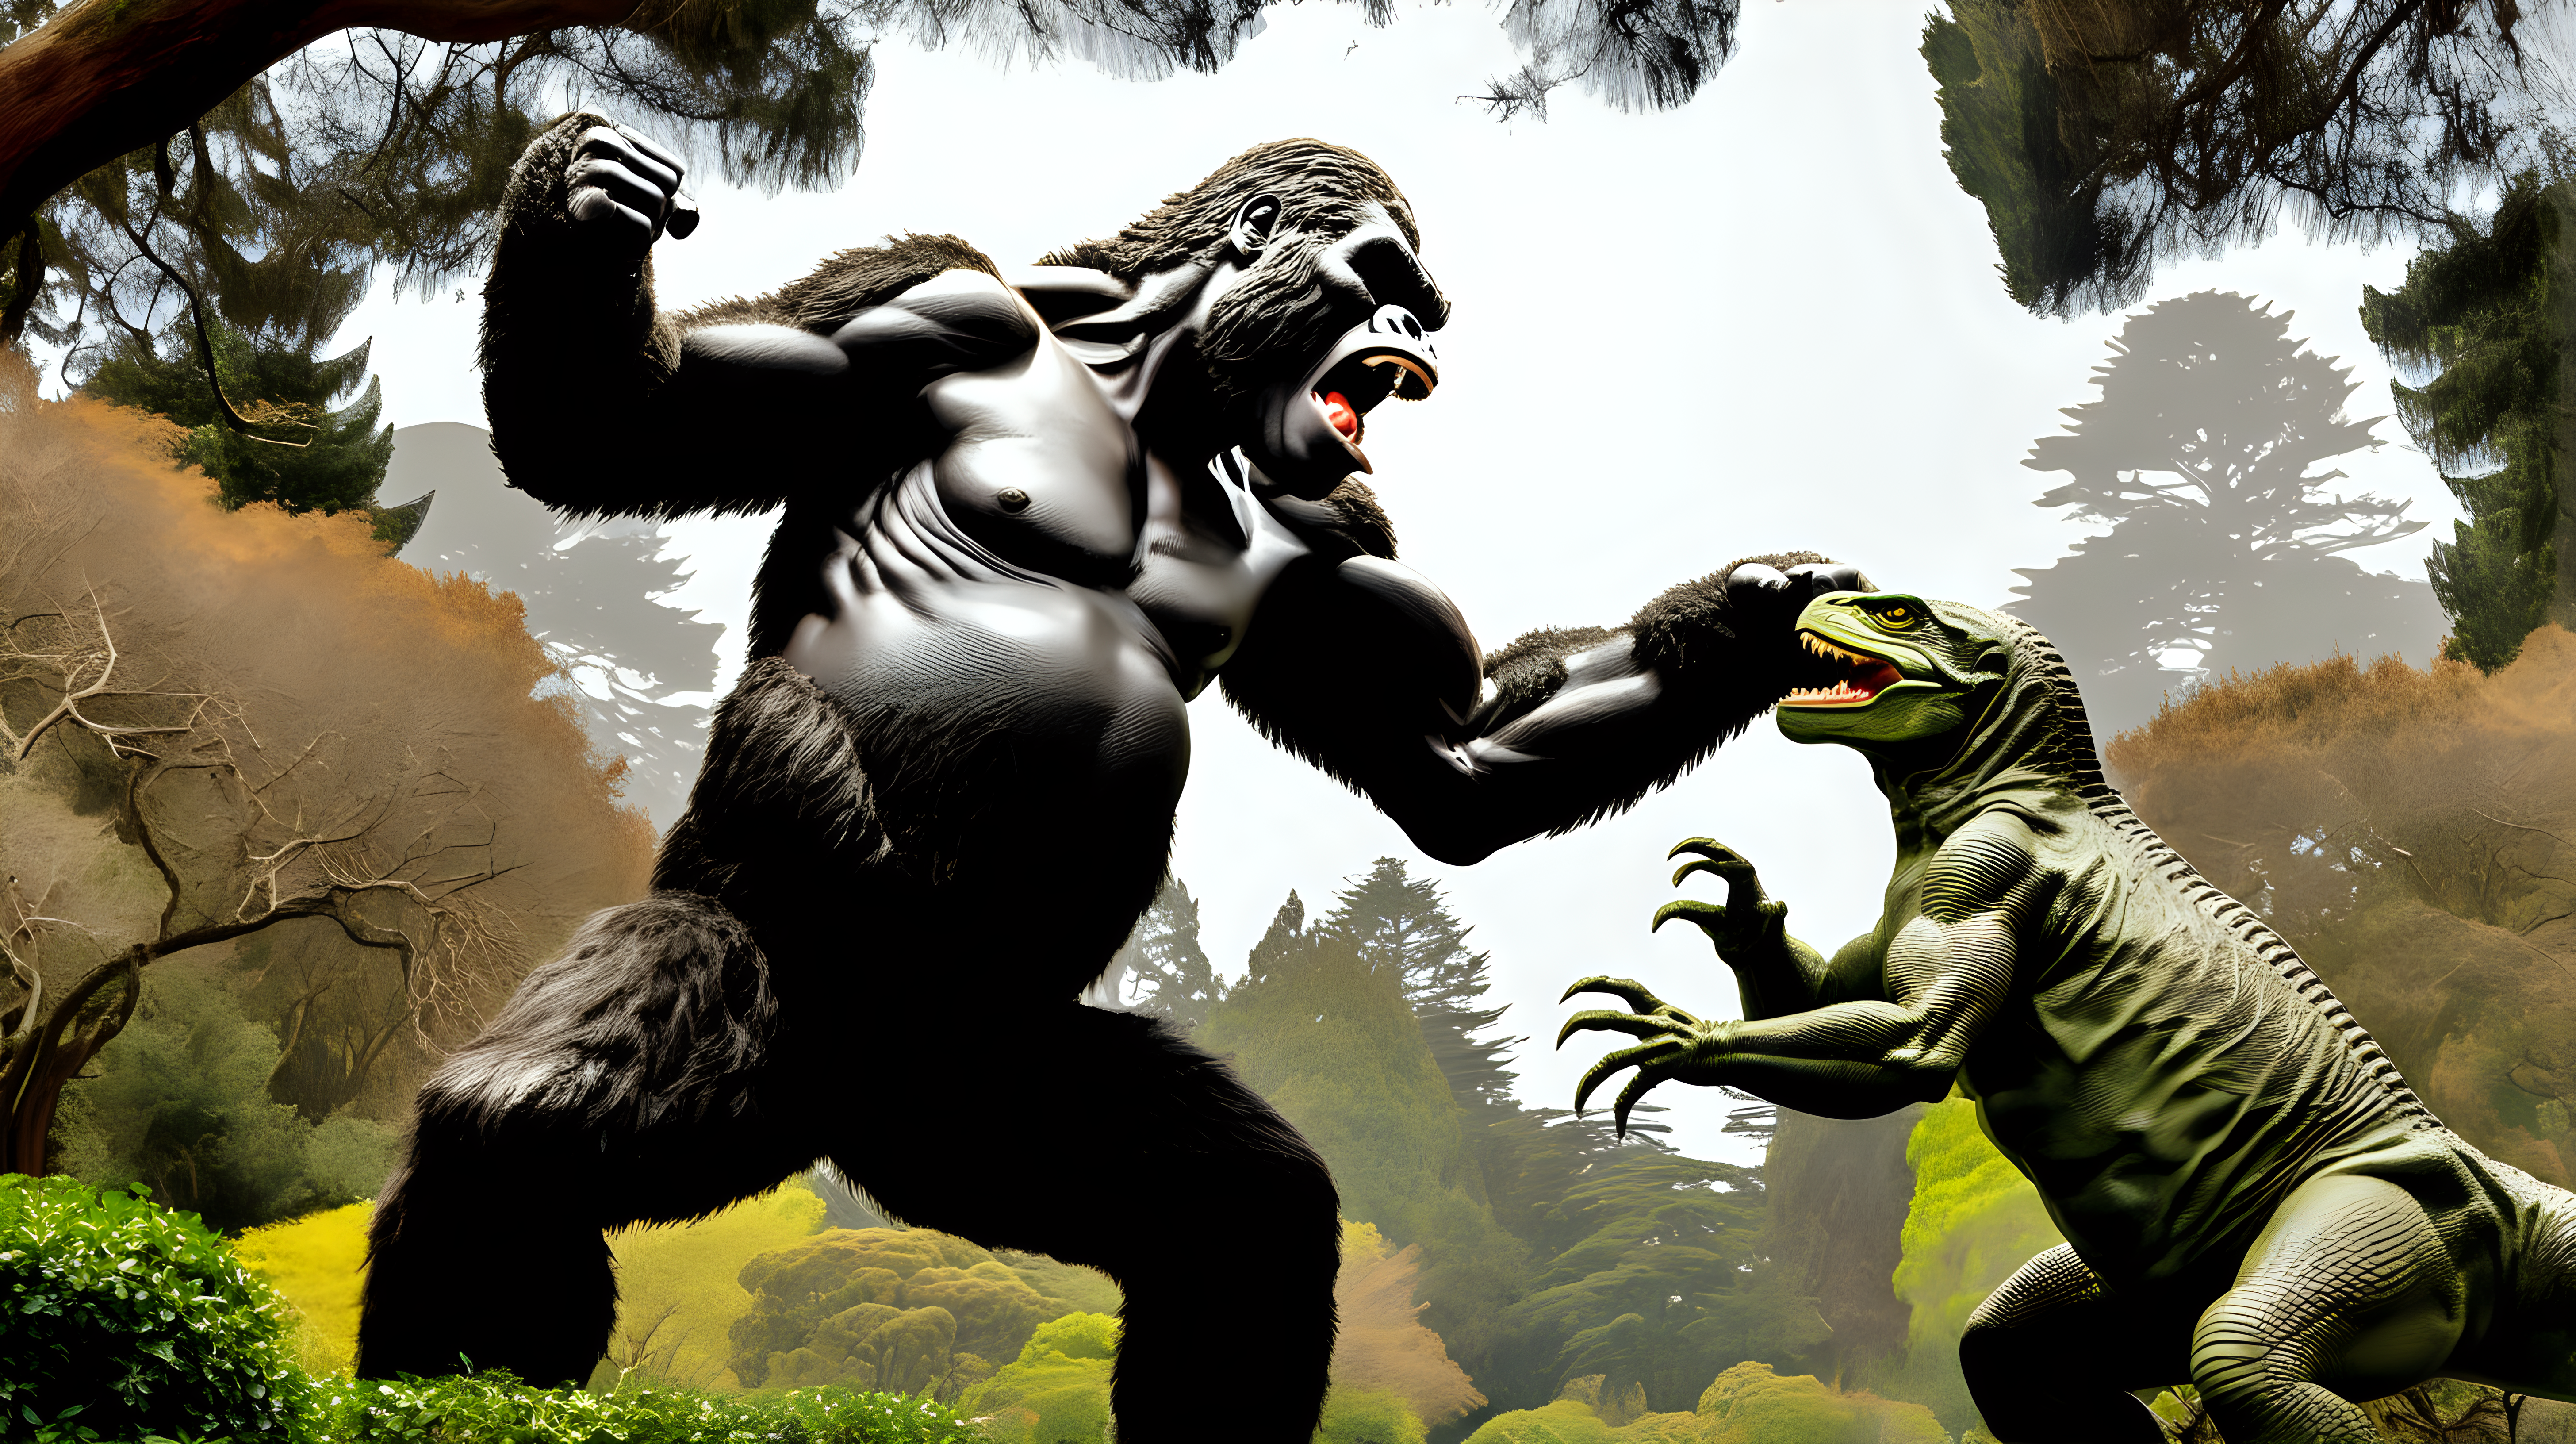 King Kong fighting a giant lizzard in Golden Gate Park